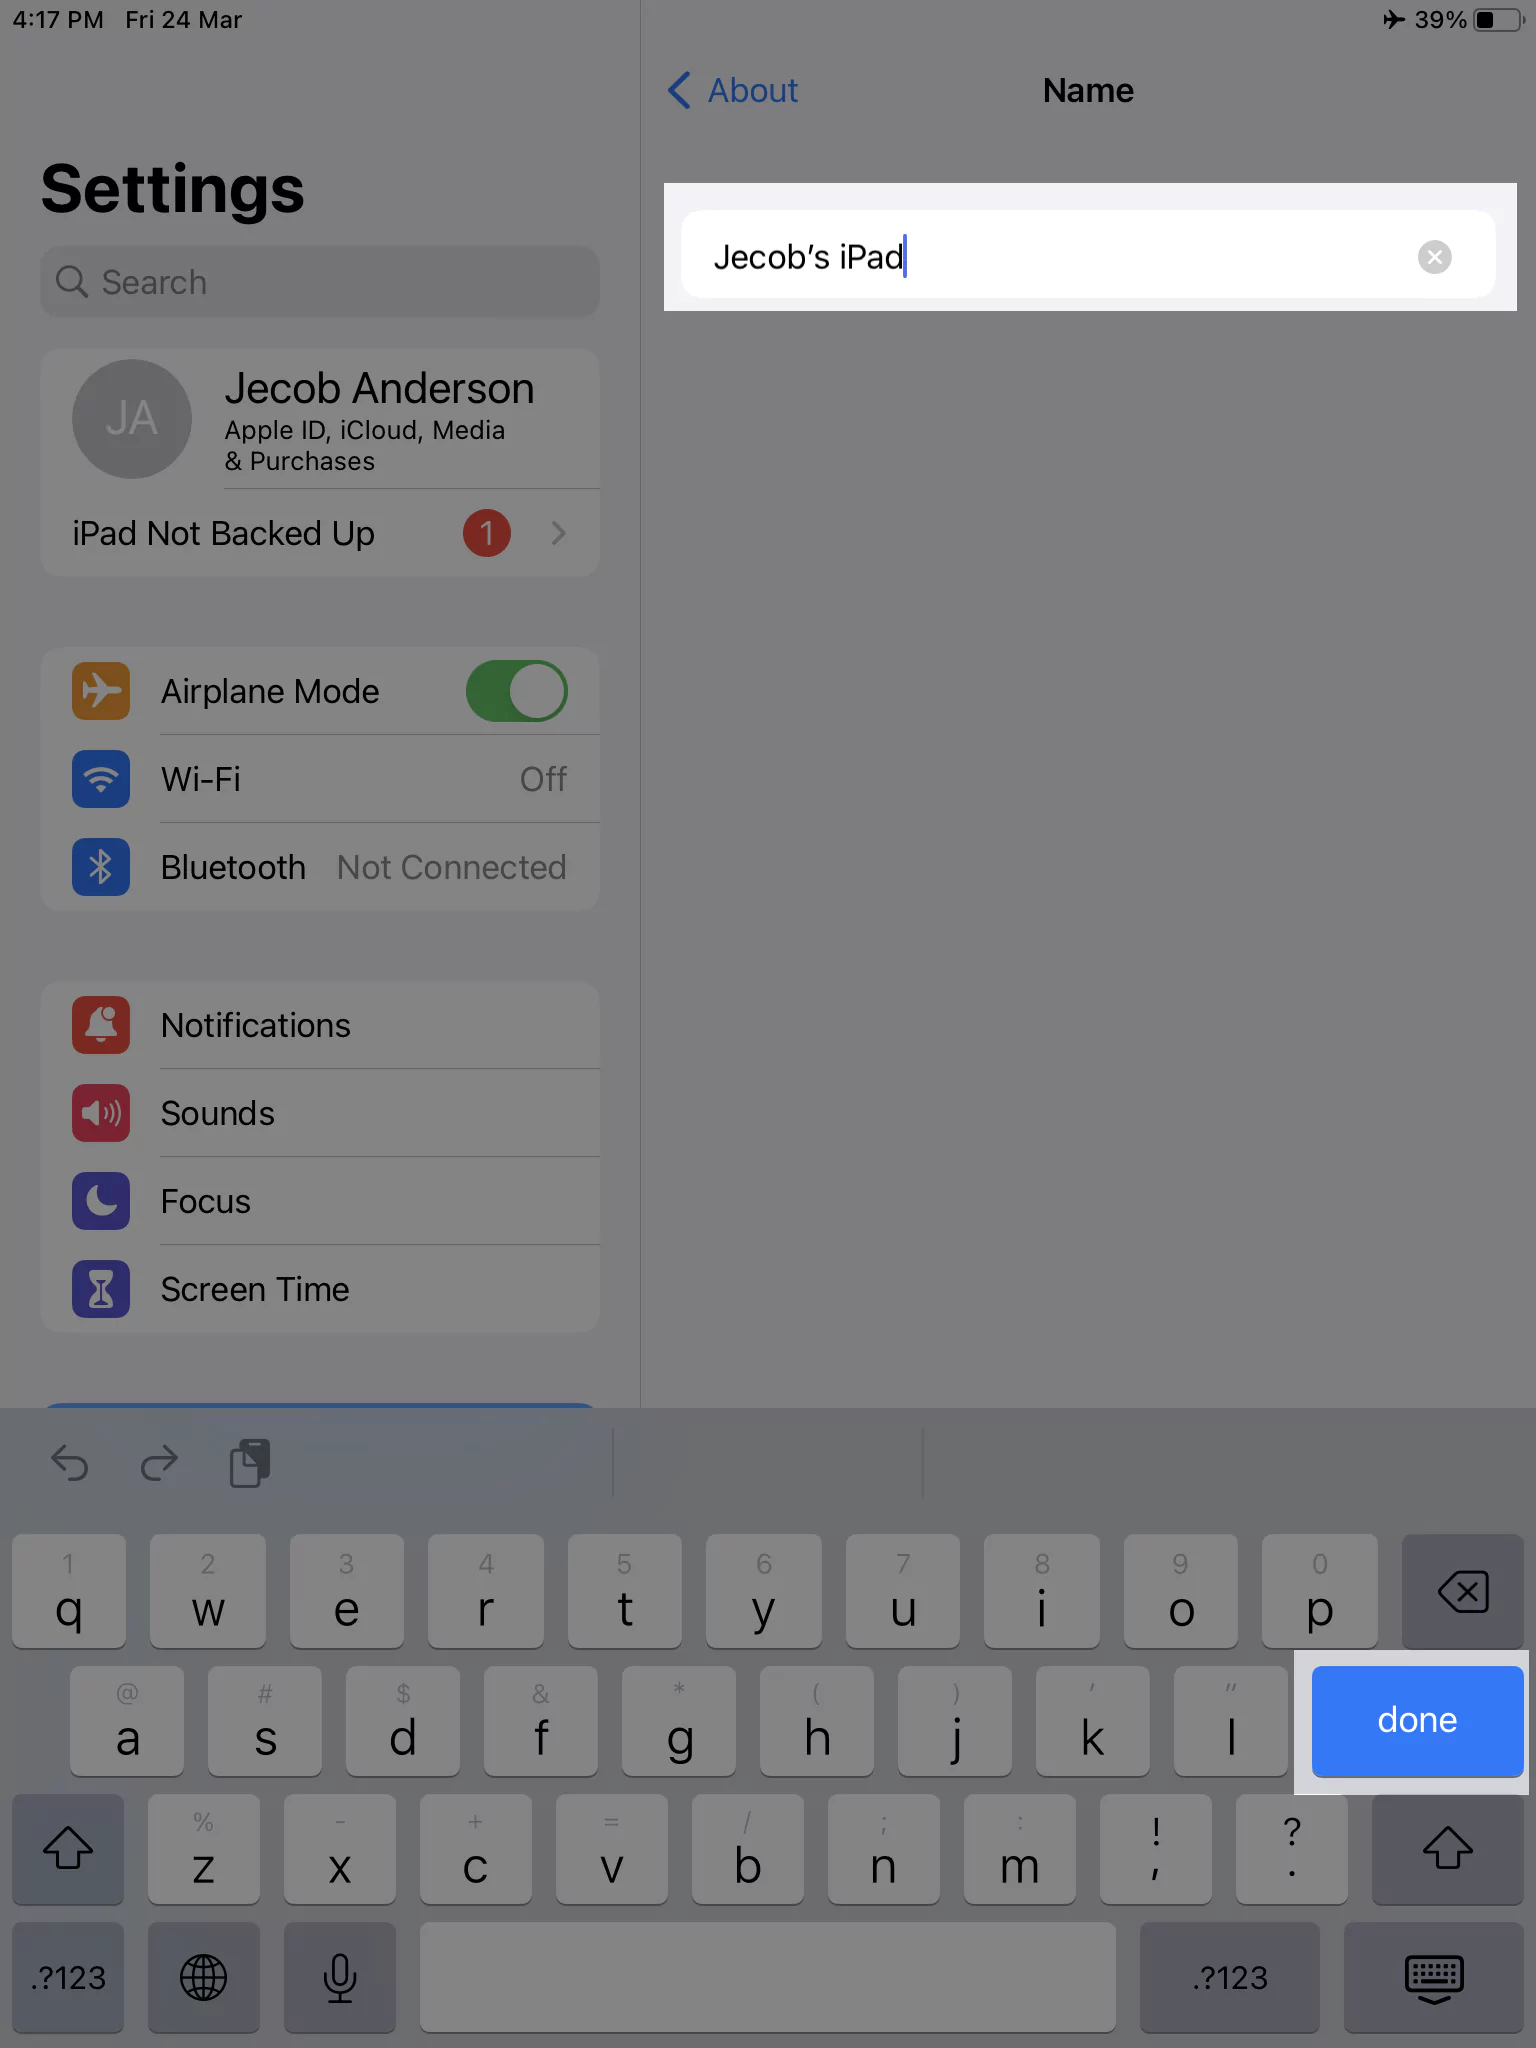 tap-on-done-button-to-save-airdrop-name-on-ipad